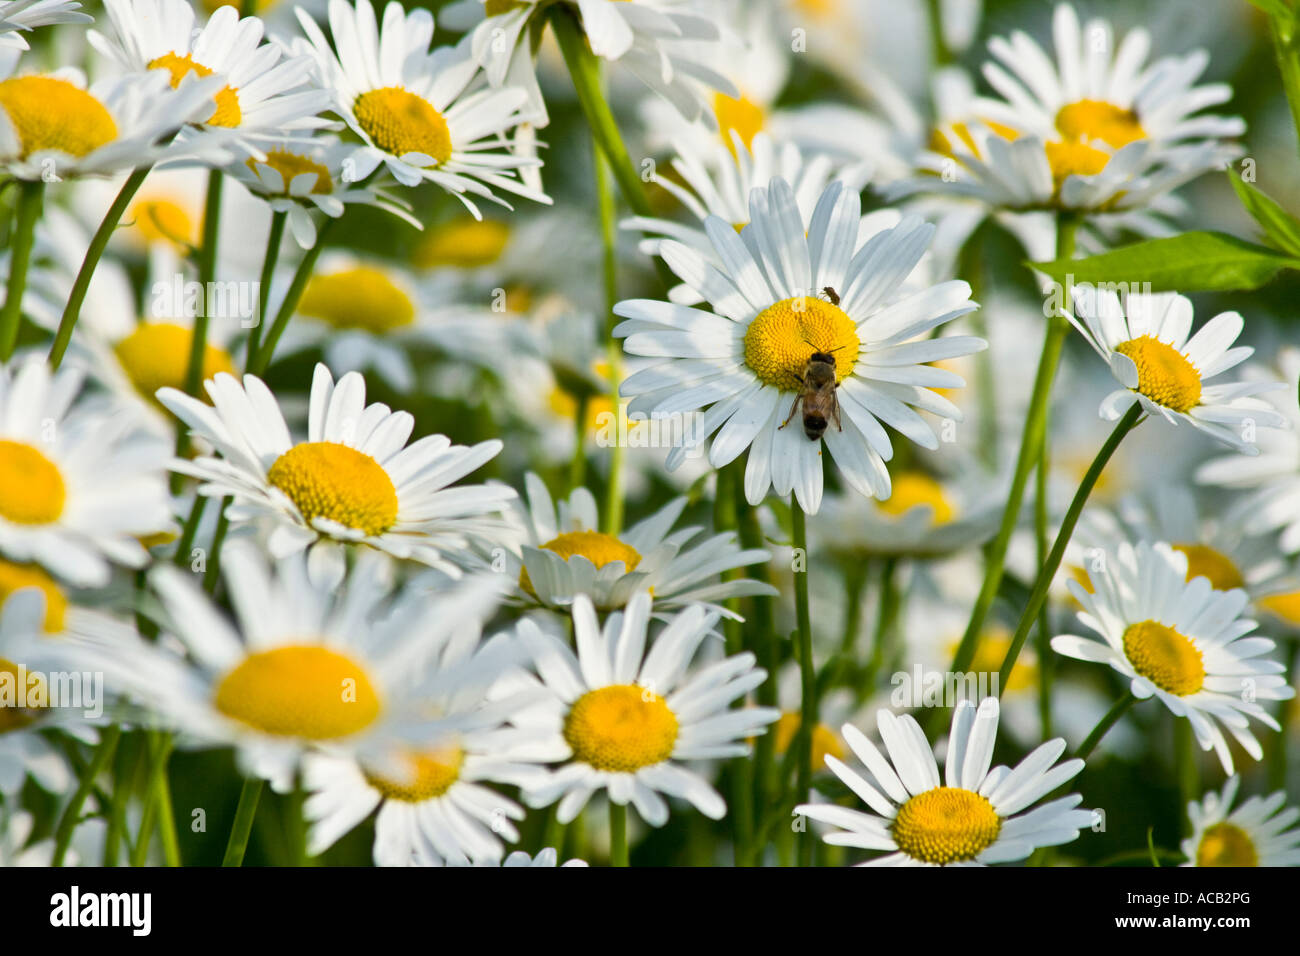 Bunch of Daisies Daisy Close Up Stock Photo